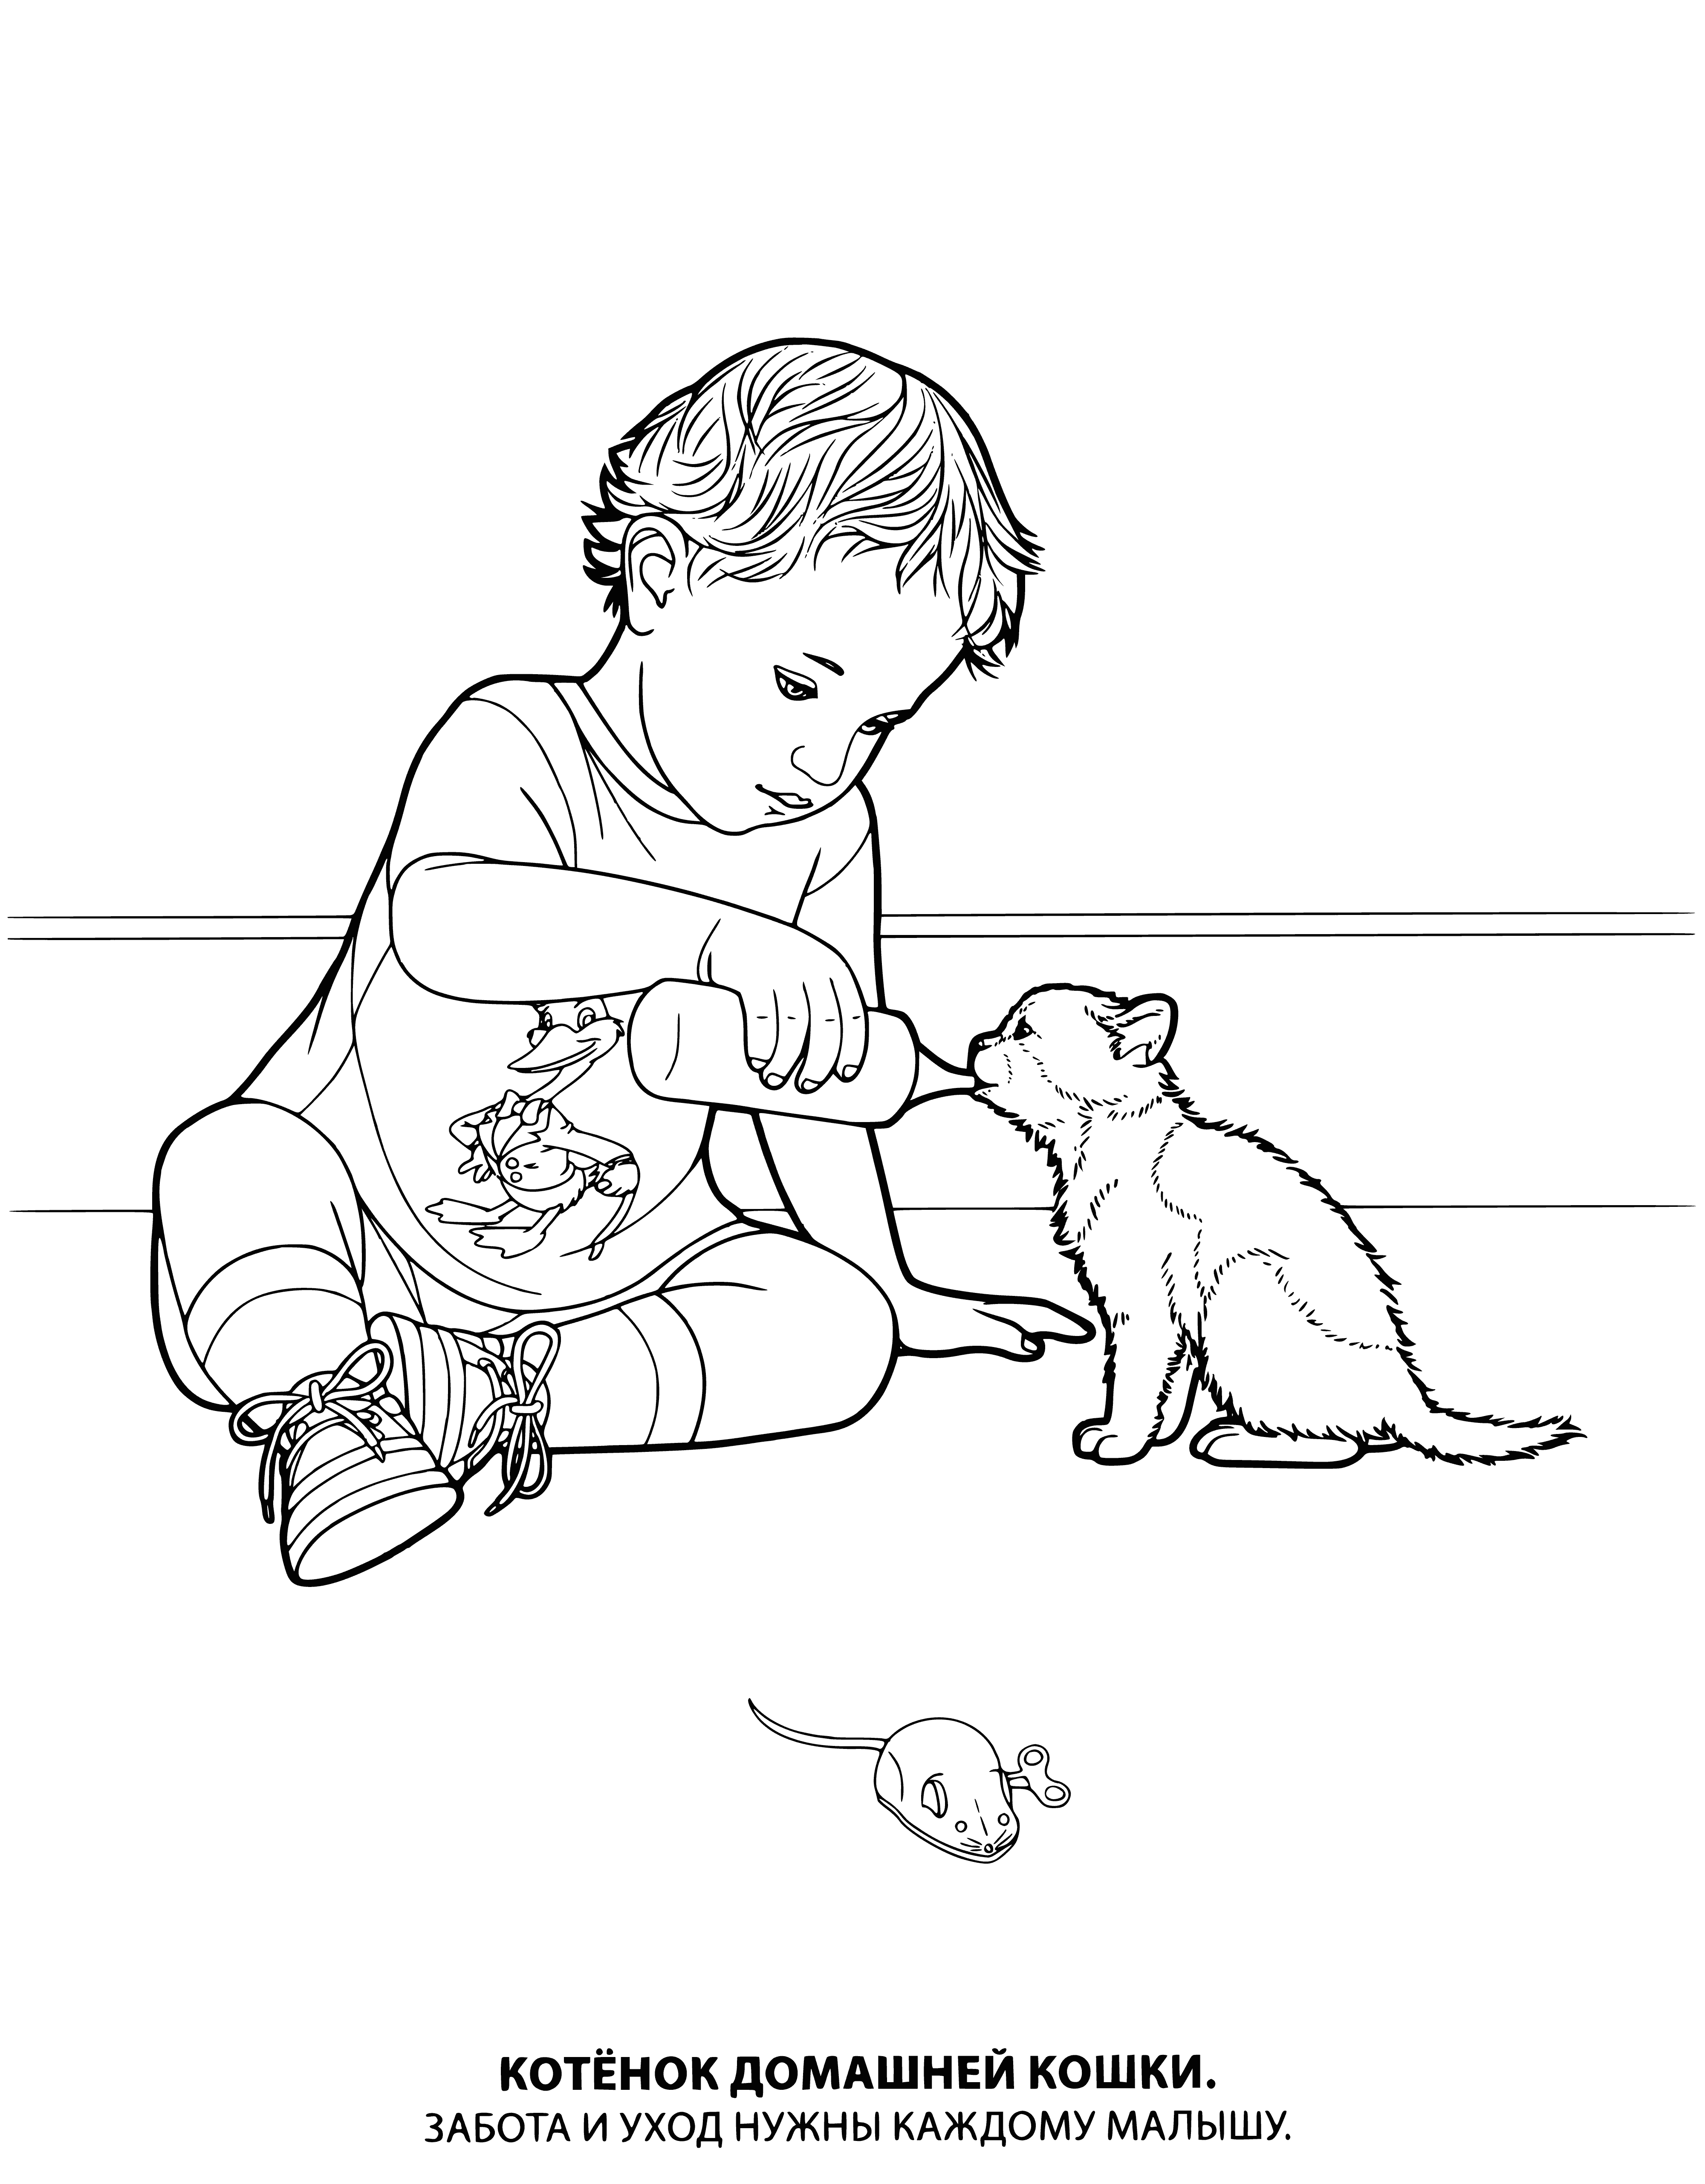 coloring page: Two small, fluffy kittens cuddle together on a blue blanket, one black and one gray and white. Big green and blue eyes gaze contentedly, tails wrapped around each other.